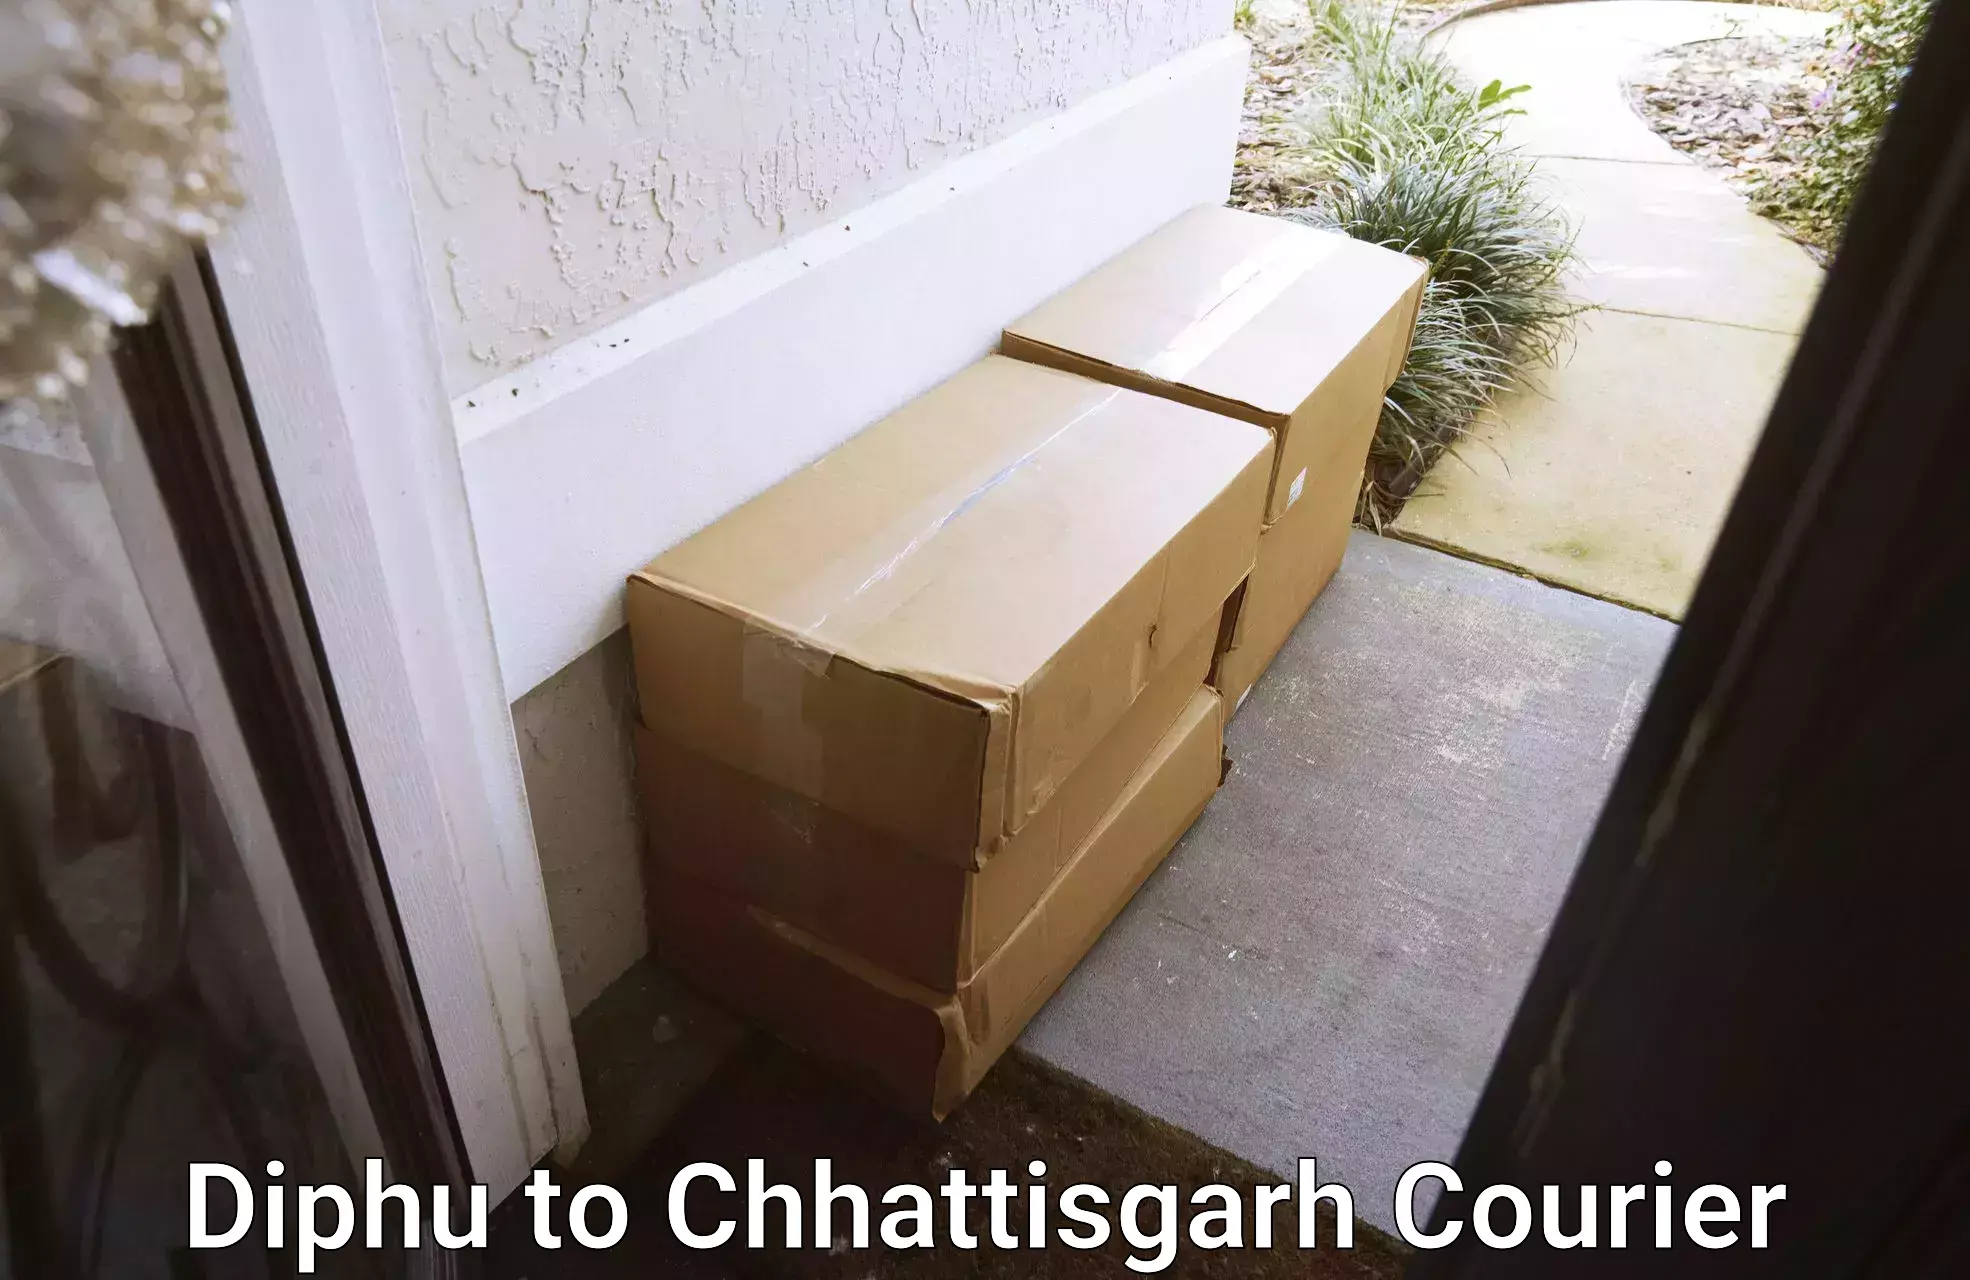 Cost-effective courier options Diphu to Patna Chhattisgarh